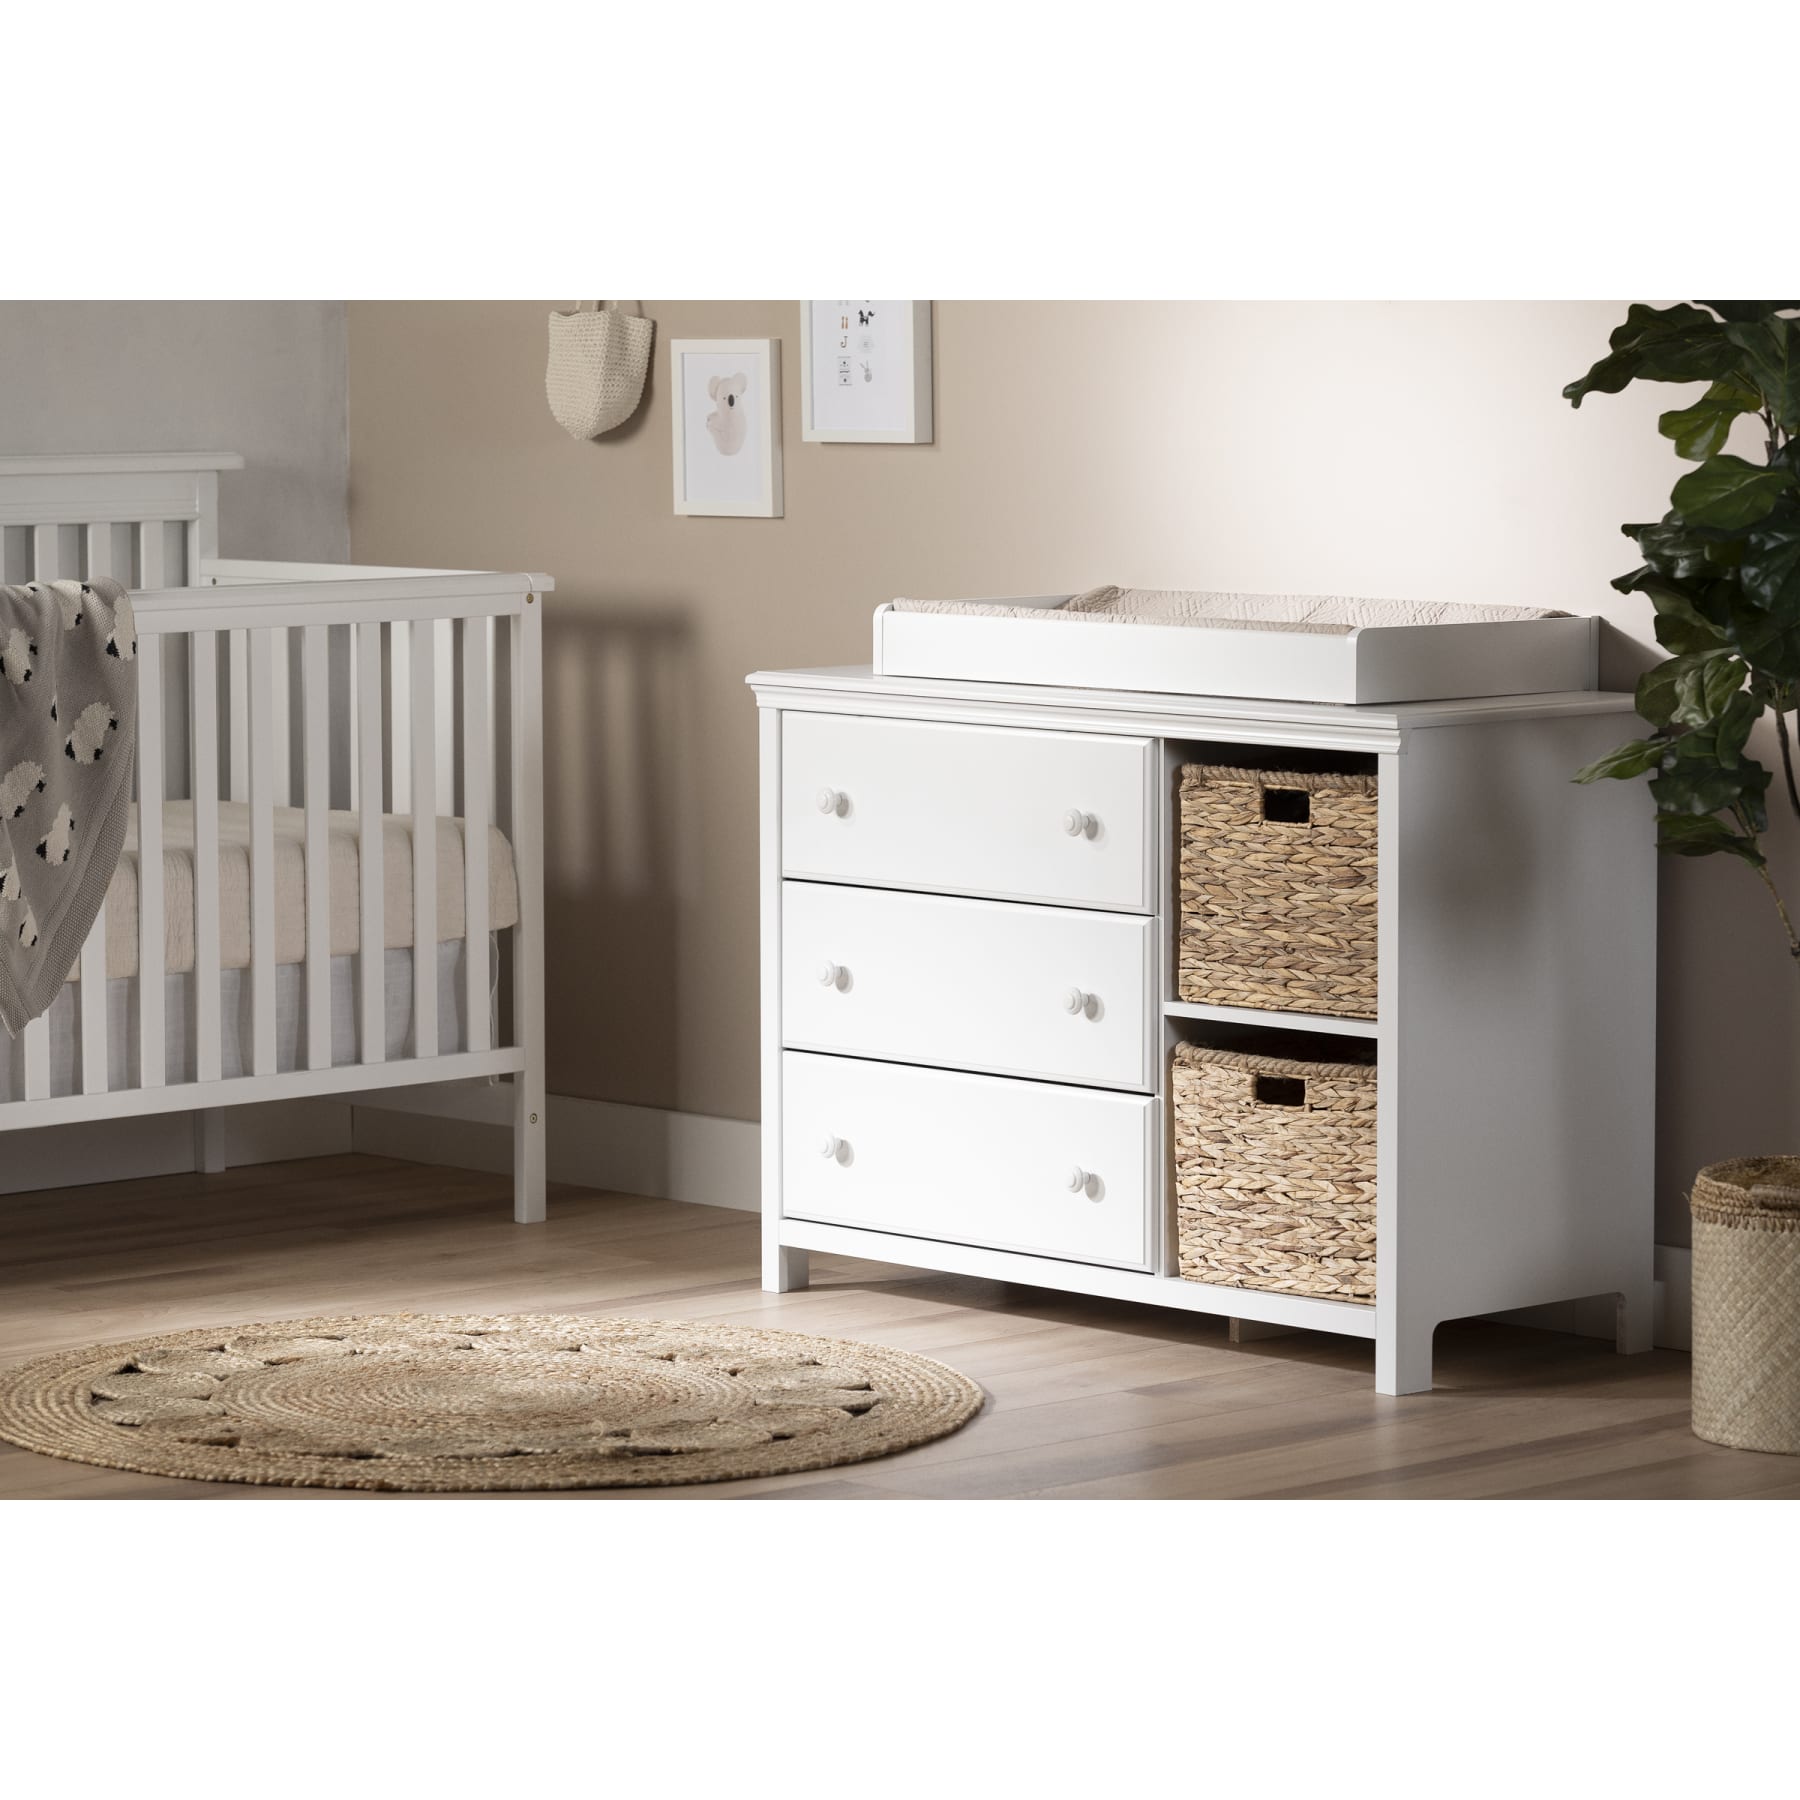 Changing table, Nursery, Baby and Kids, Products